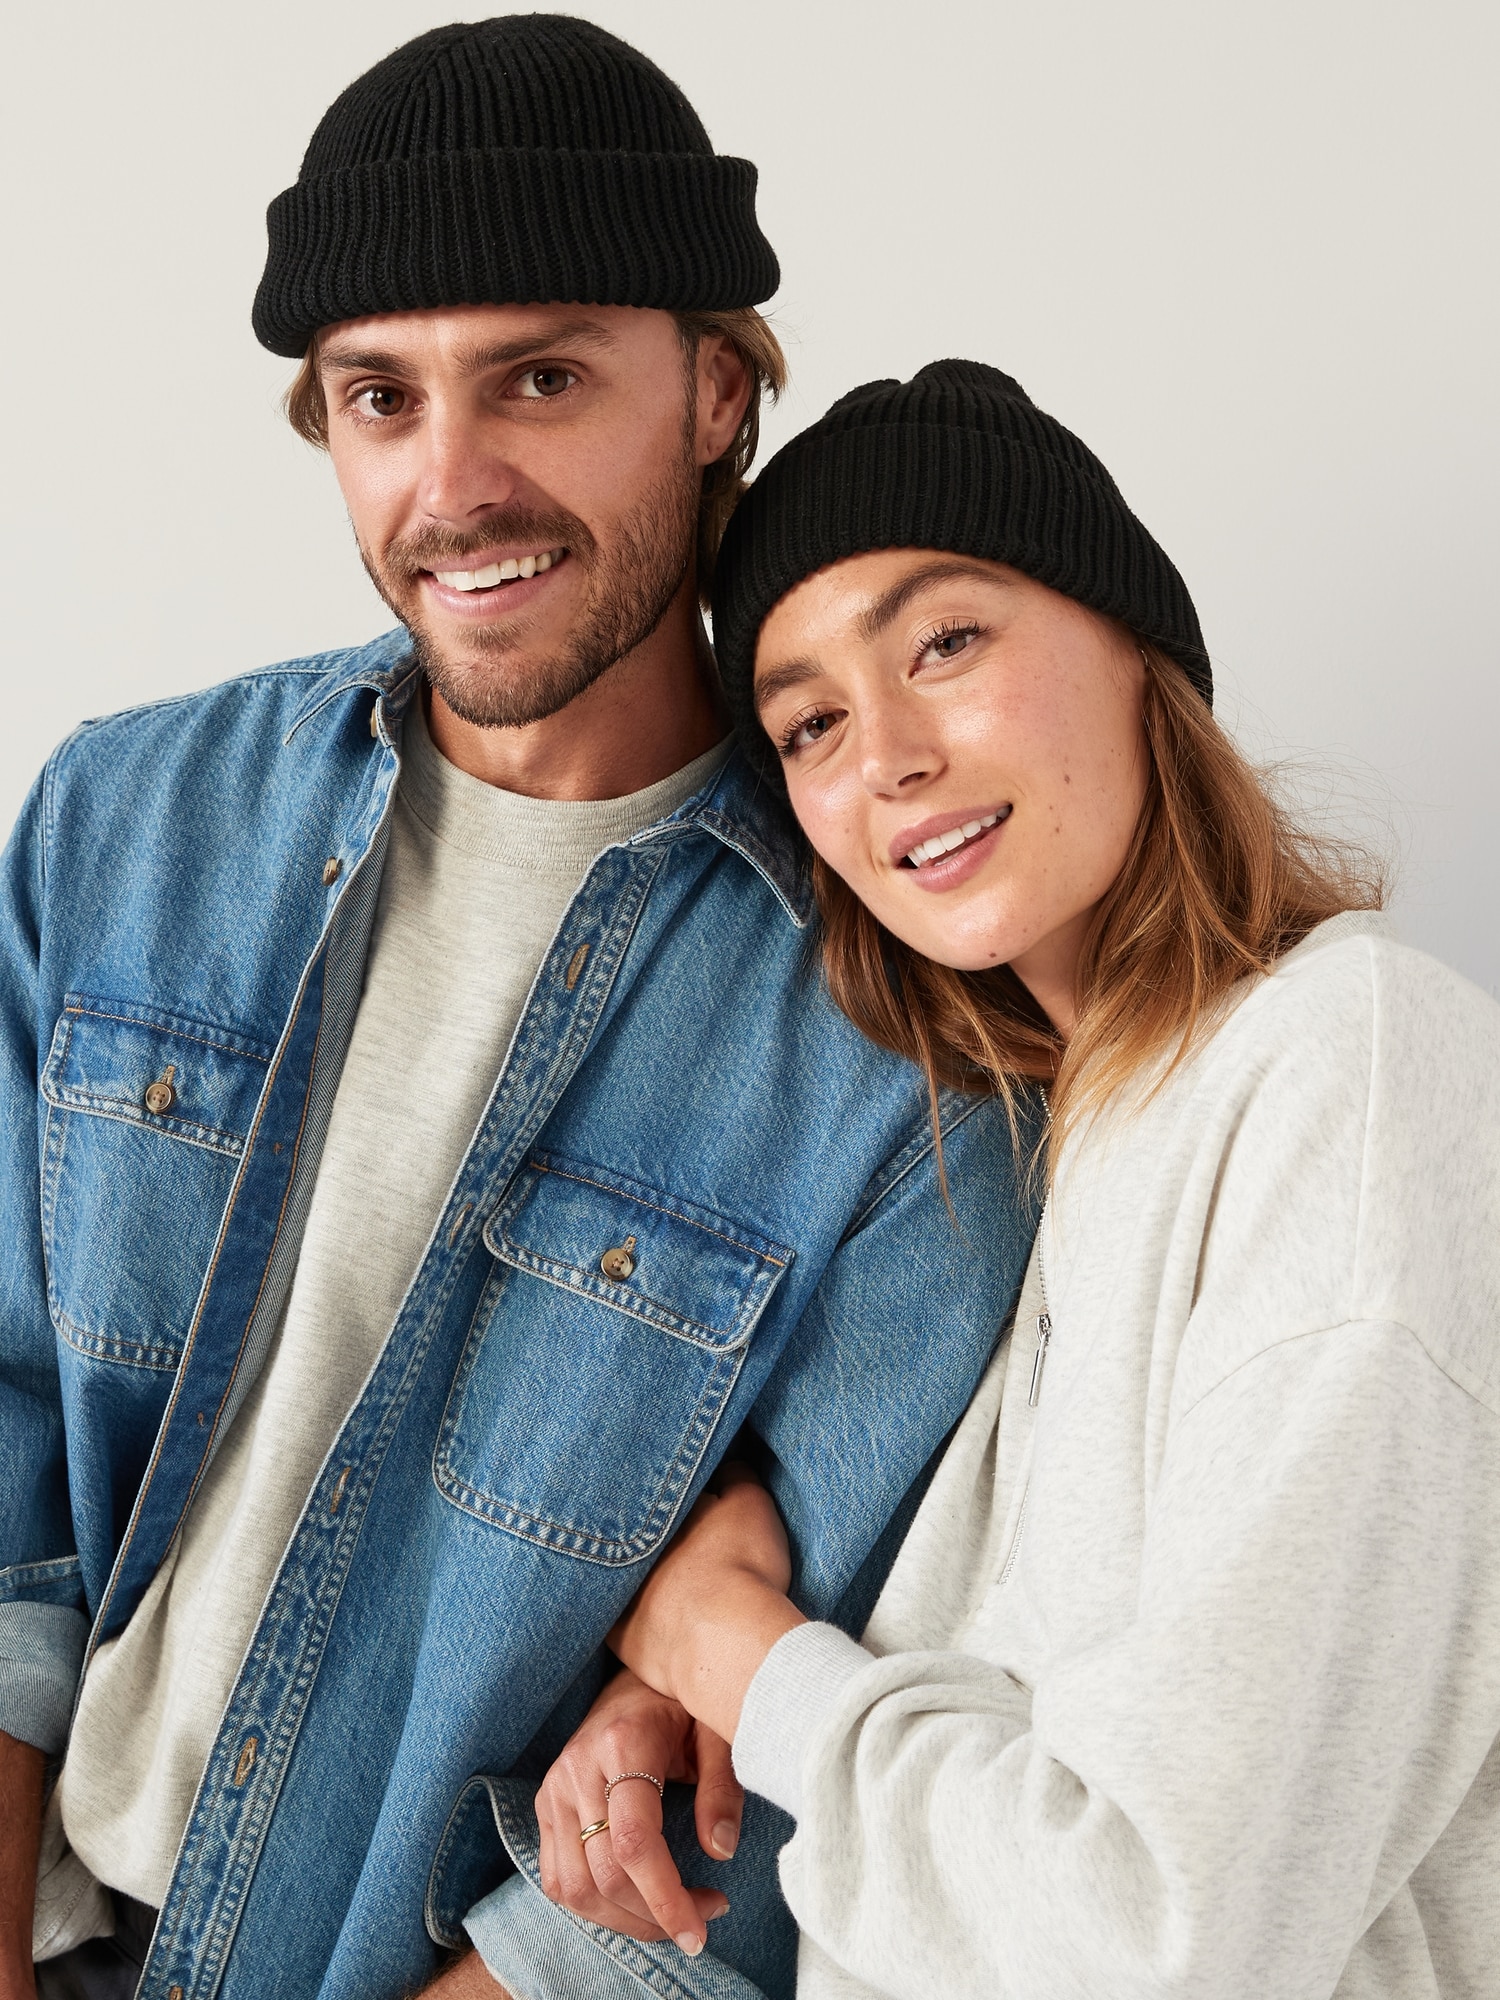 Gender-Neutral Rib-Knit Beanie Hat for Adults | Old Navy